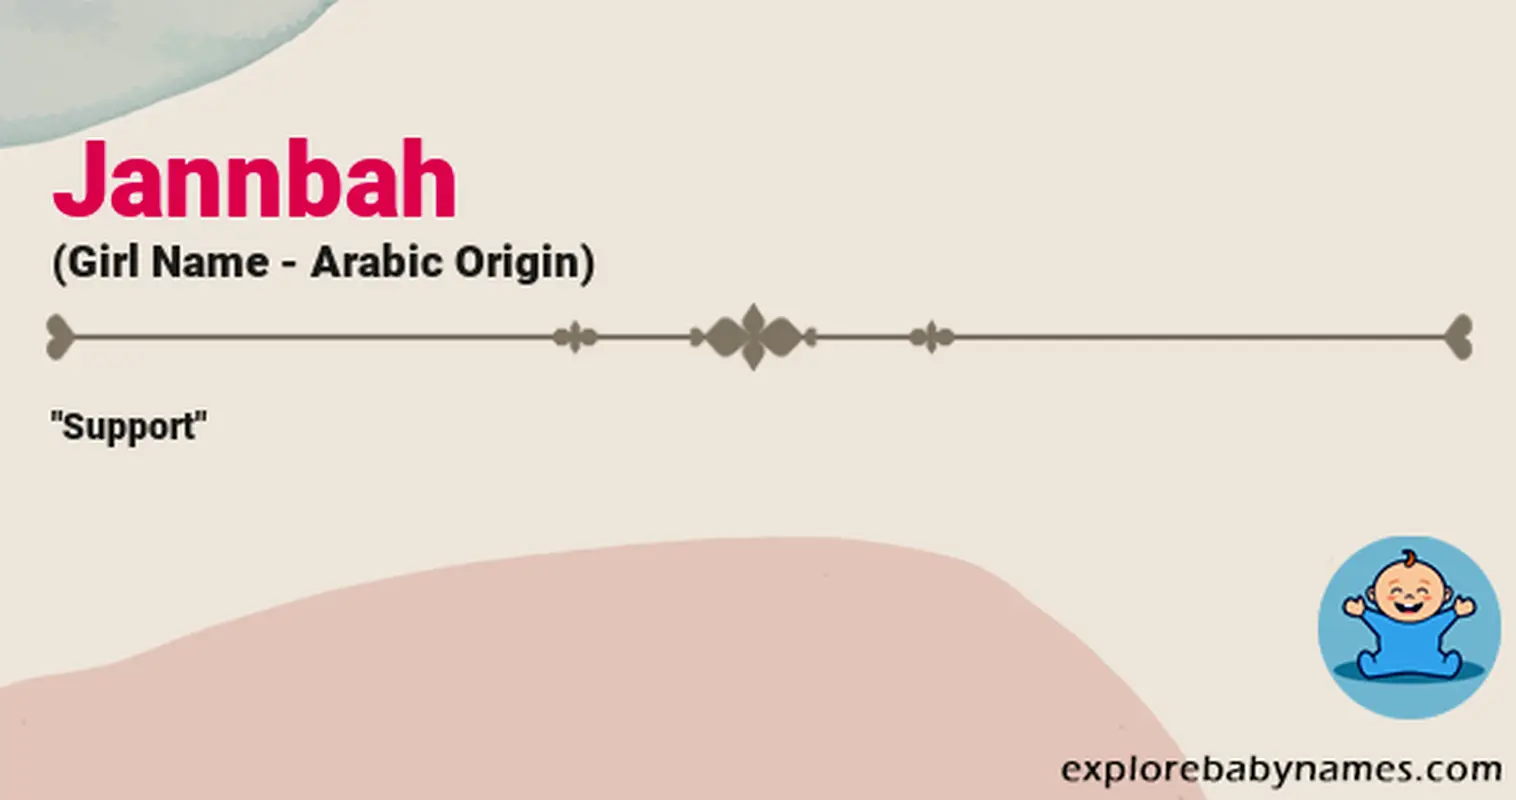 Meaning of Jannbah